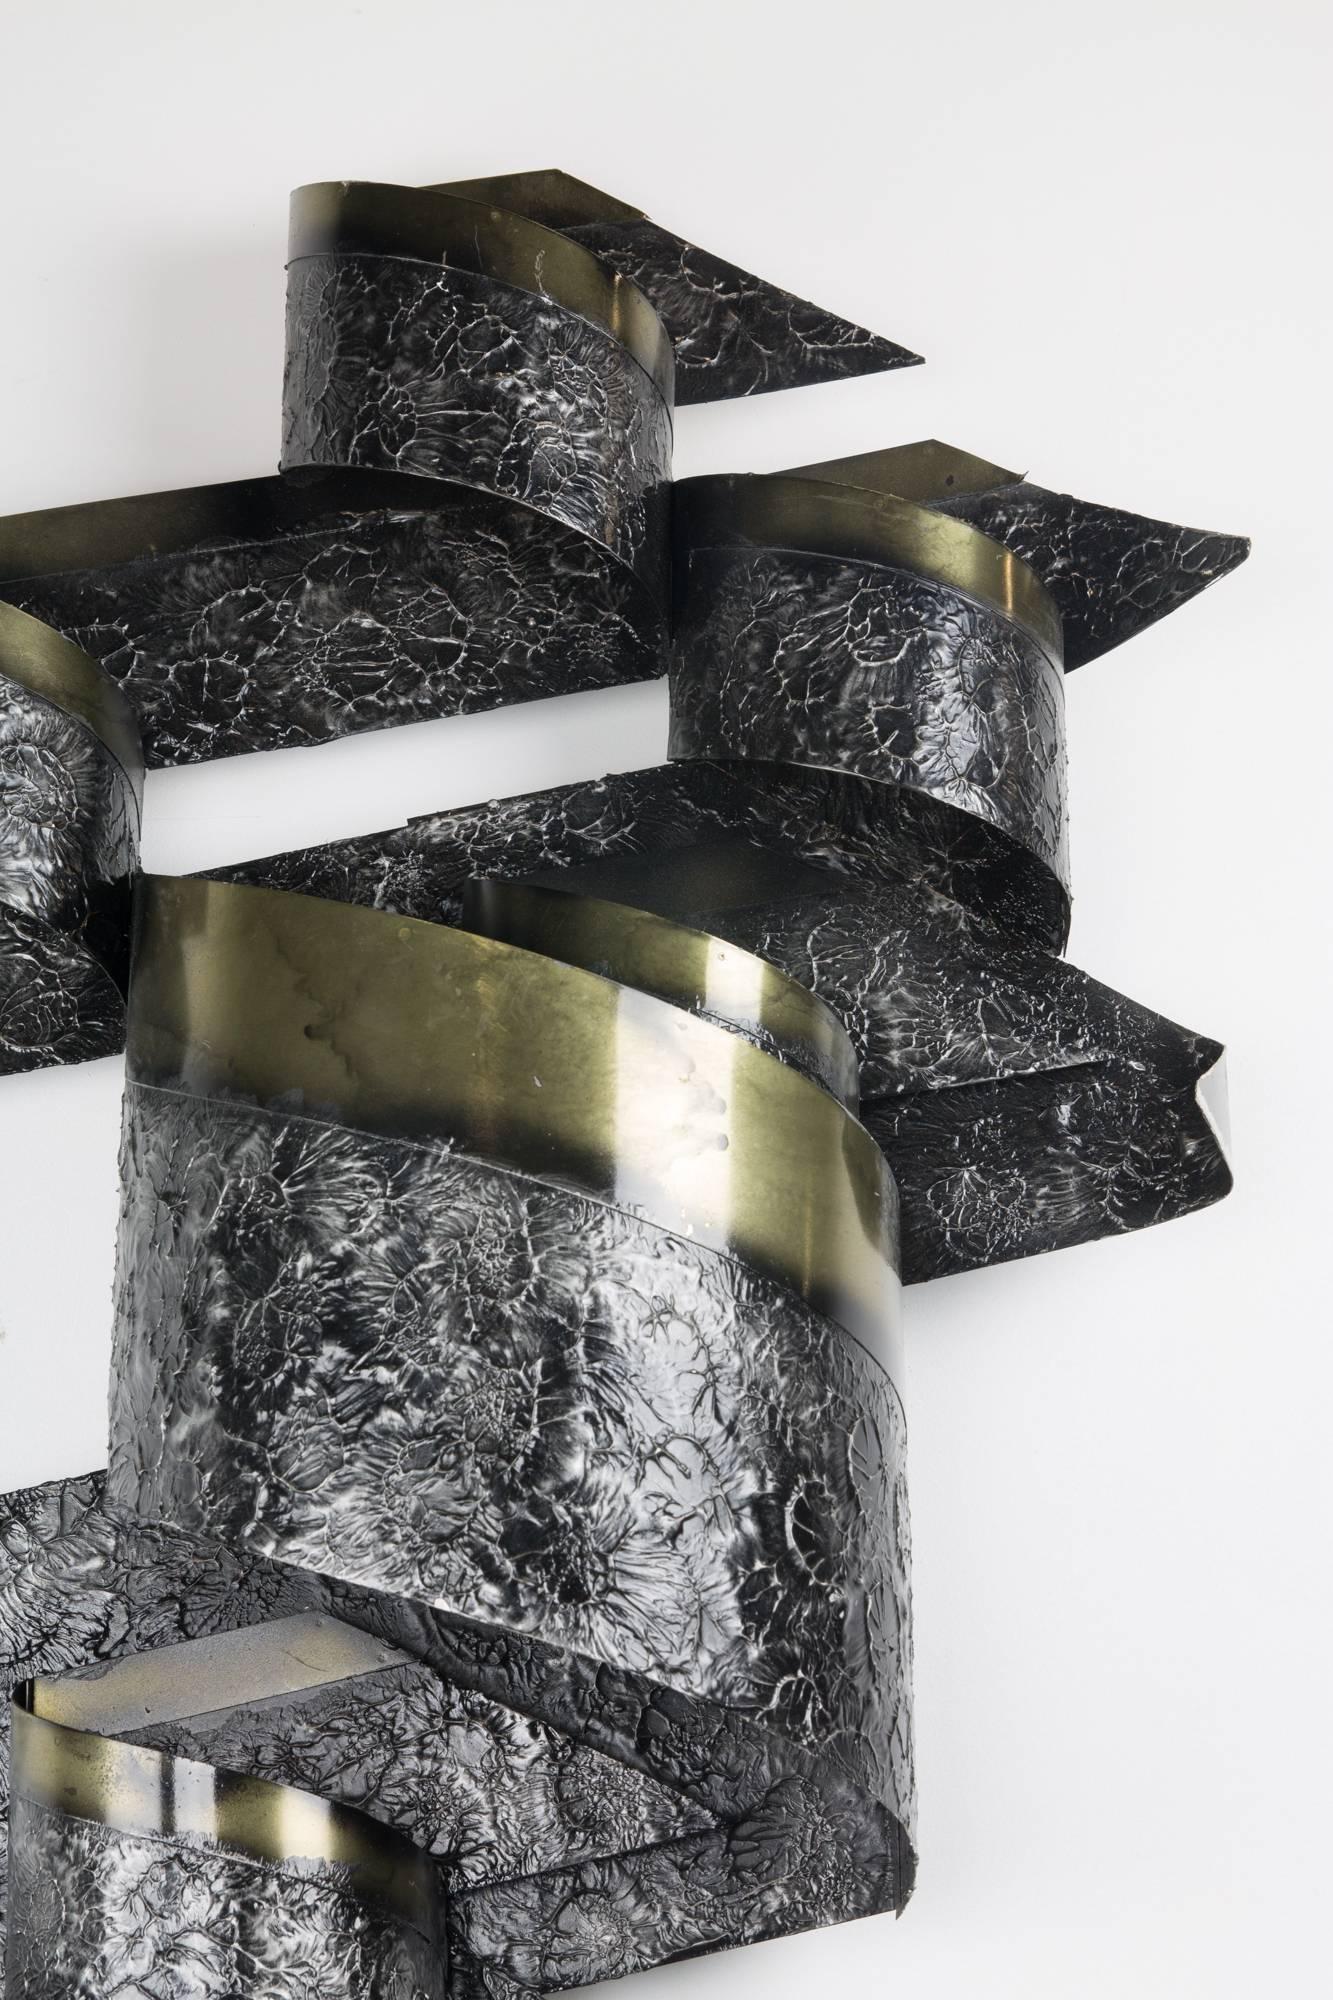 Brutalist steel and brass wall sculpture by C. Jeré for Artisan House with rough and smooth surface finishes. Retains original Artisan House tag, and is signed 